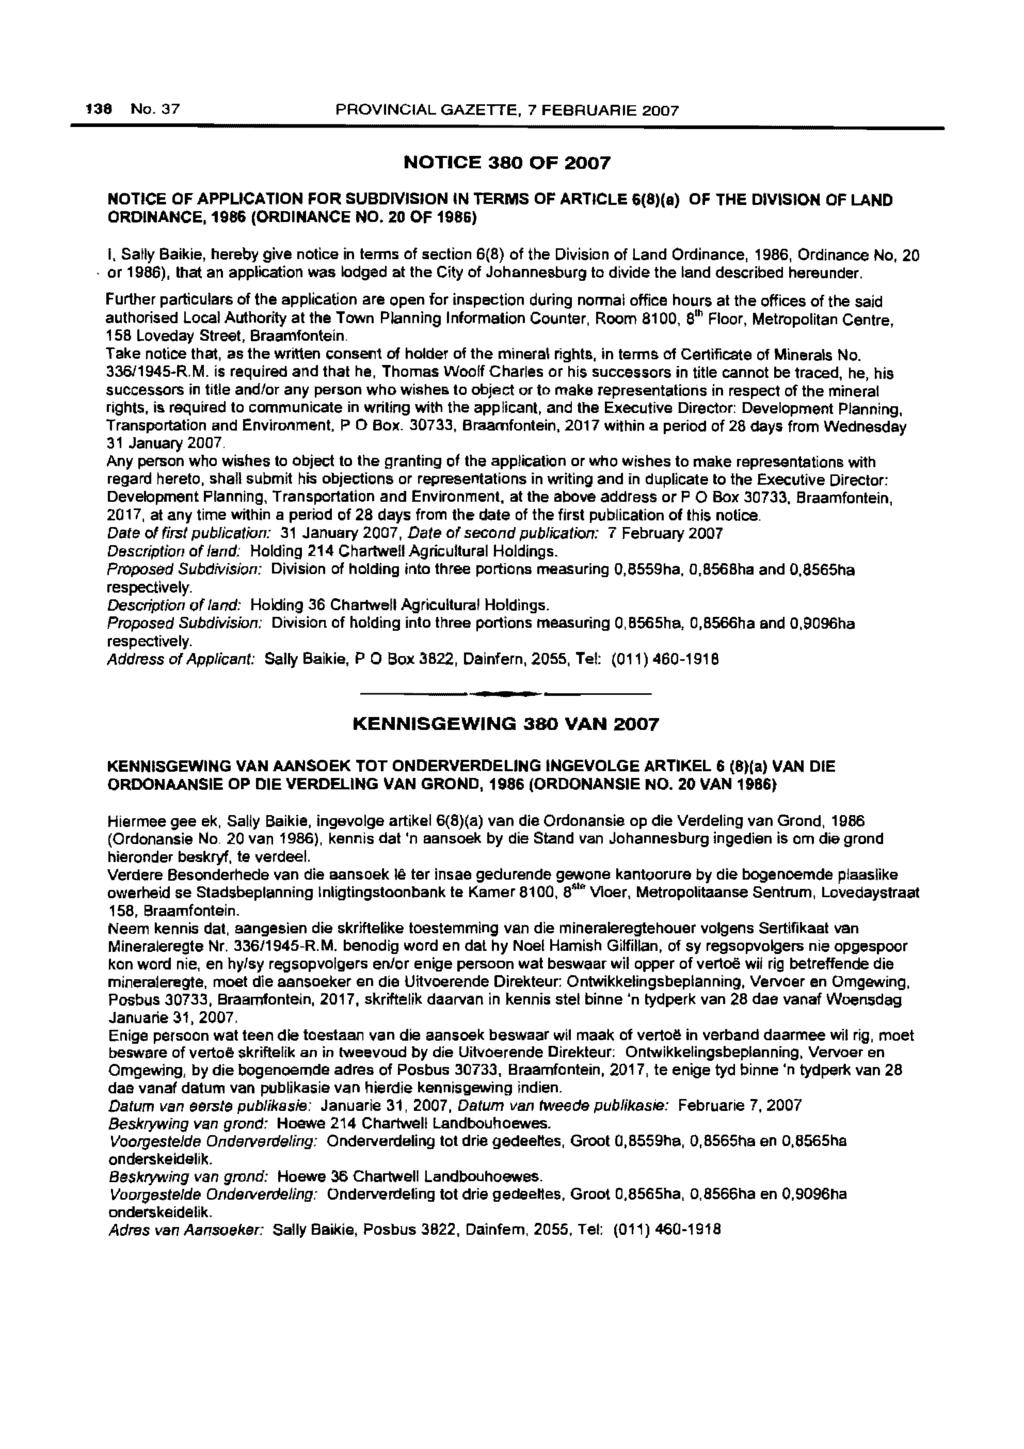 138 No.37 PROVINCIAL GAZETTE, 7 FEBRUARIE 2007 NOTICE 380 OF 2007 NOTICE OF APPLICATION FOR SUBDIVISION IN TERMS OF ARTICLE 6(8)(8) OF THE DIVISION OF LAND ORDINANCE, 1986 (ORDINANCE NO.